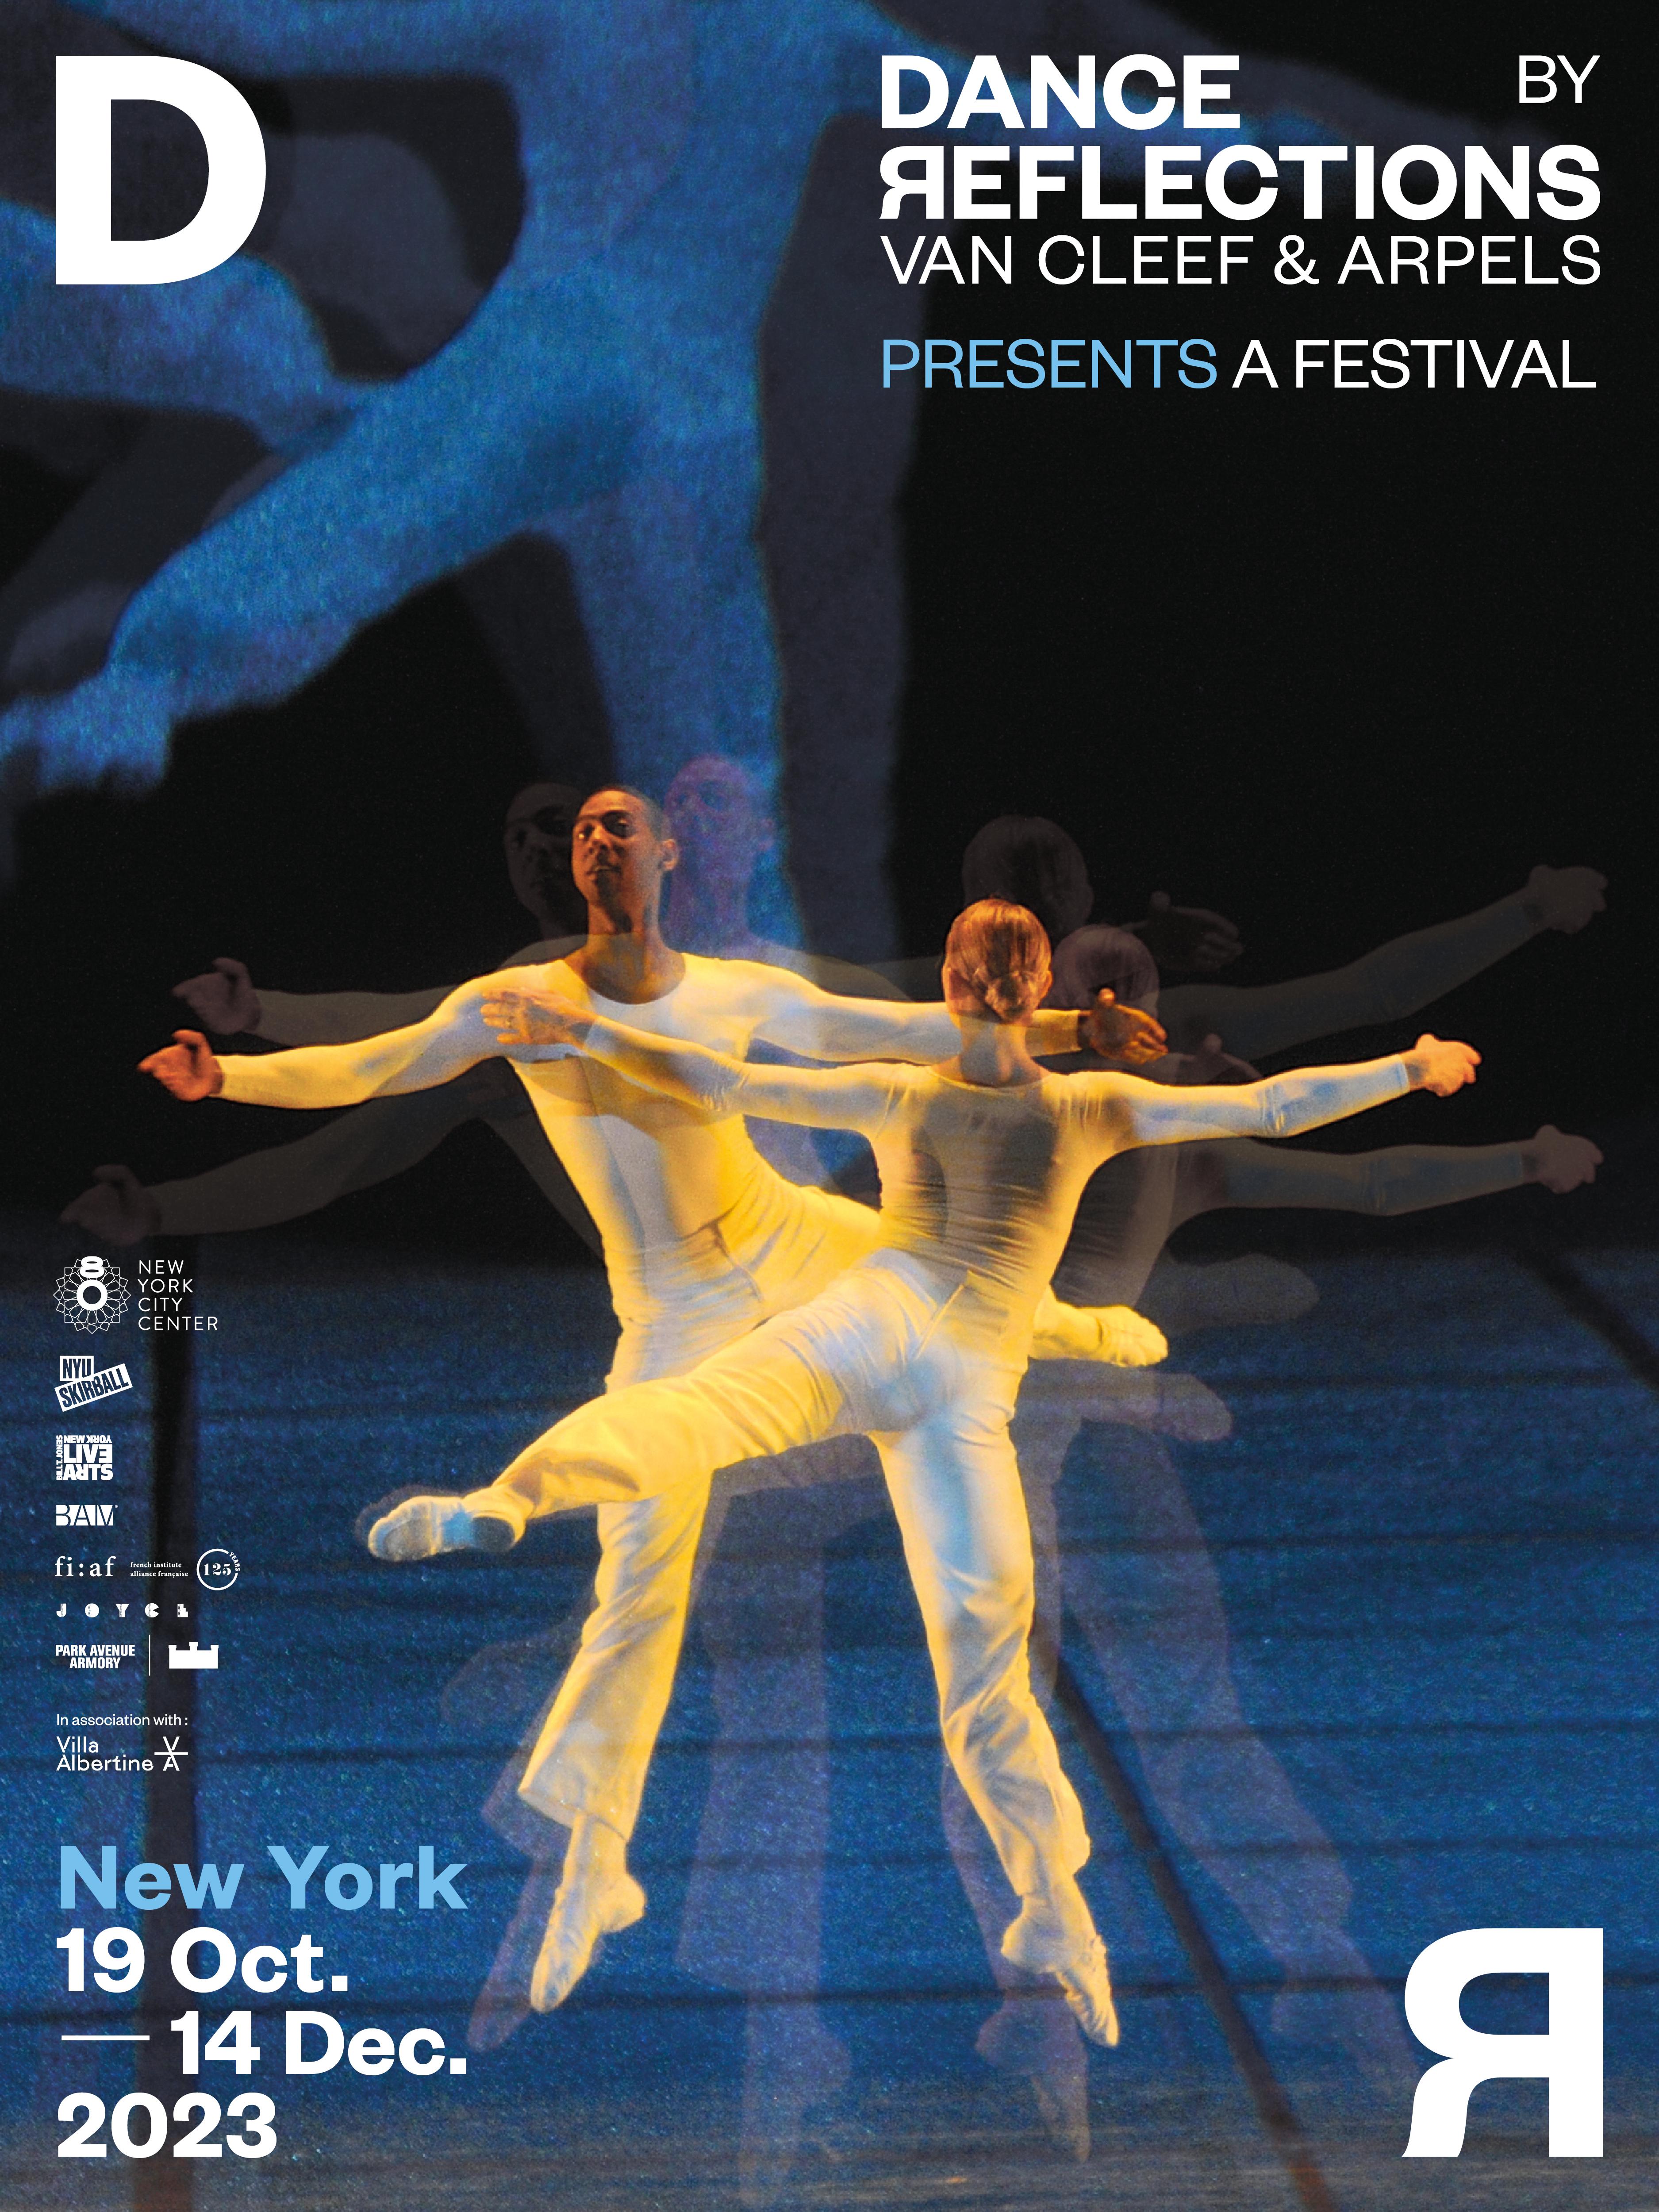 New York Festival poster - two dancers cross each other with arms and legs spread.